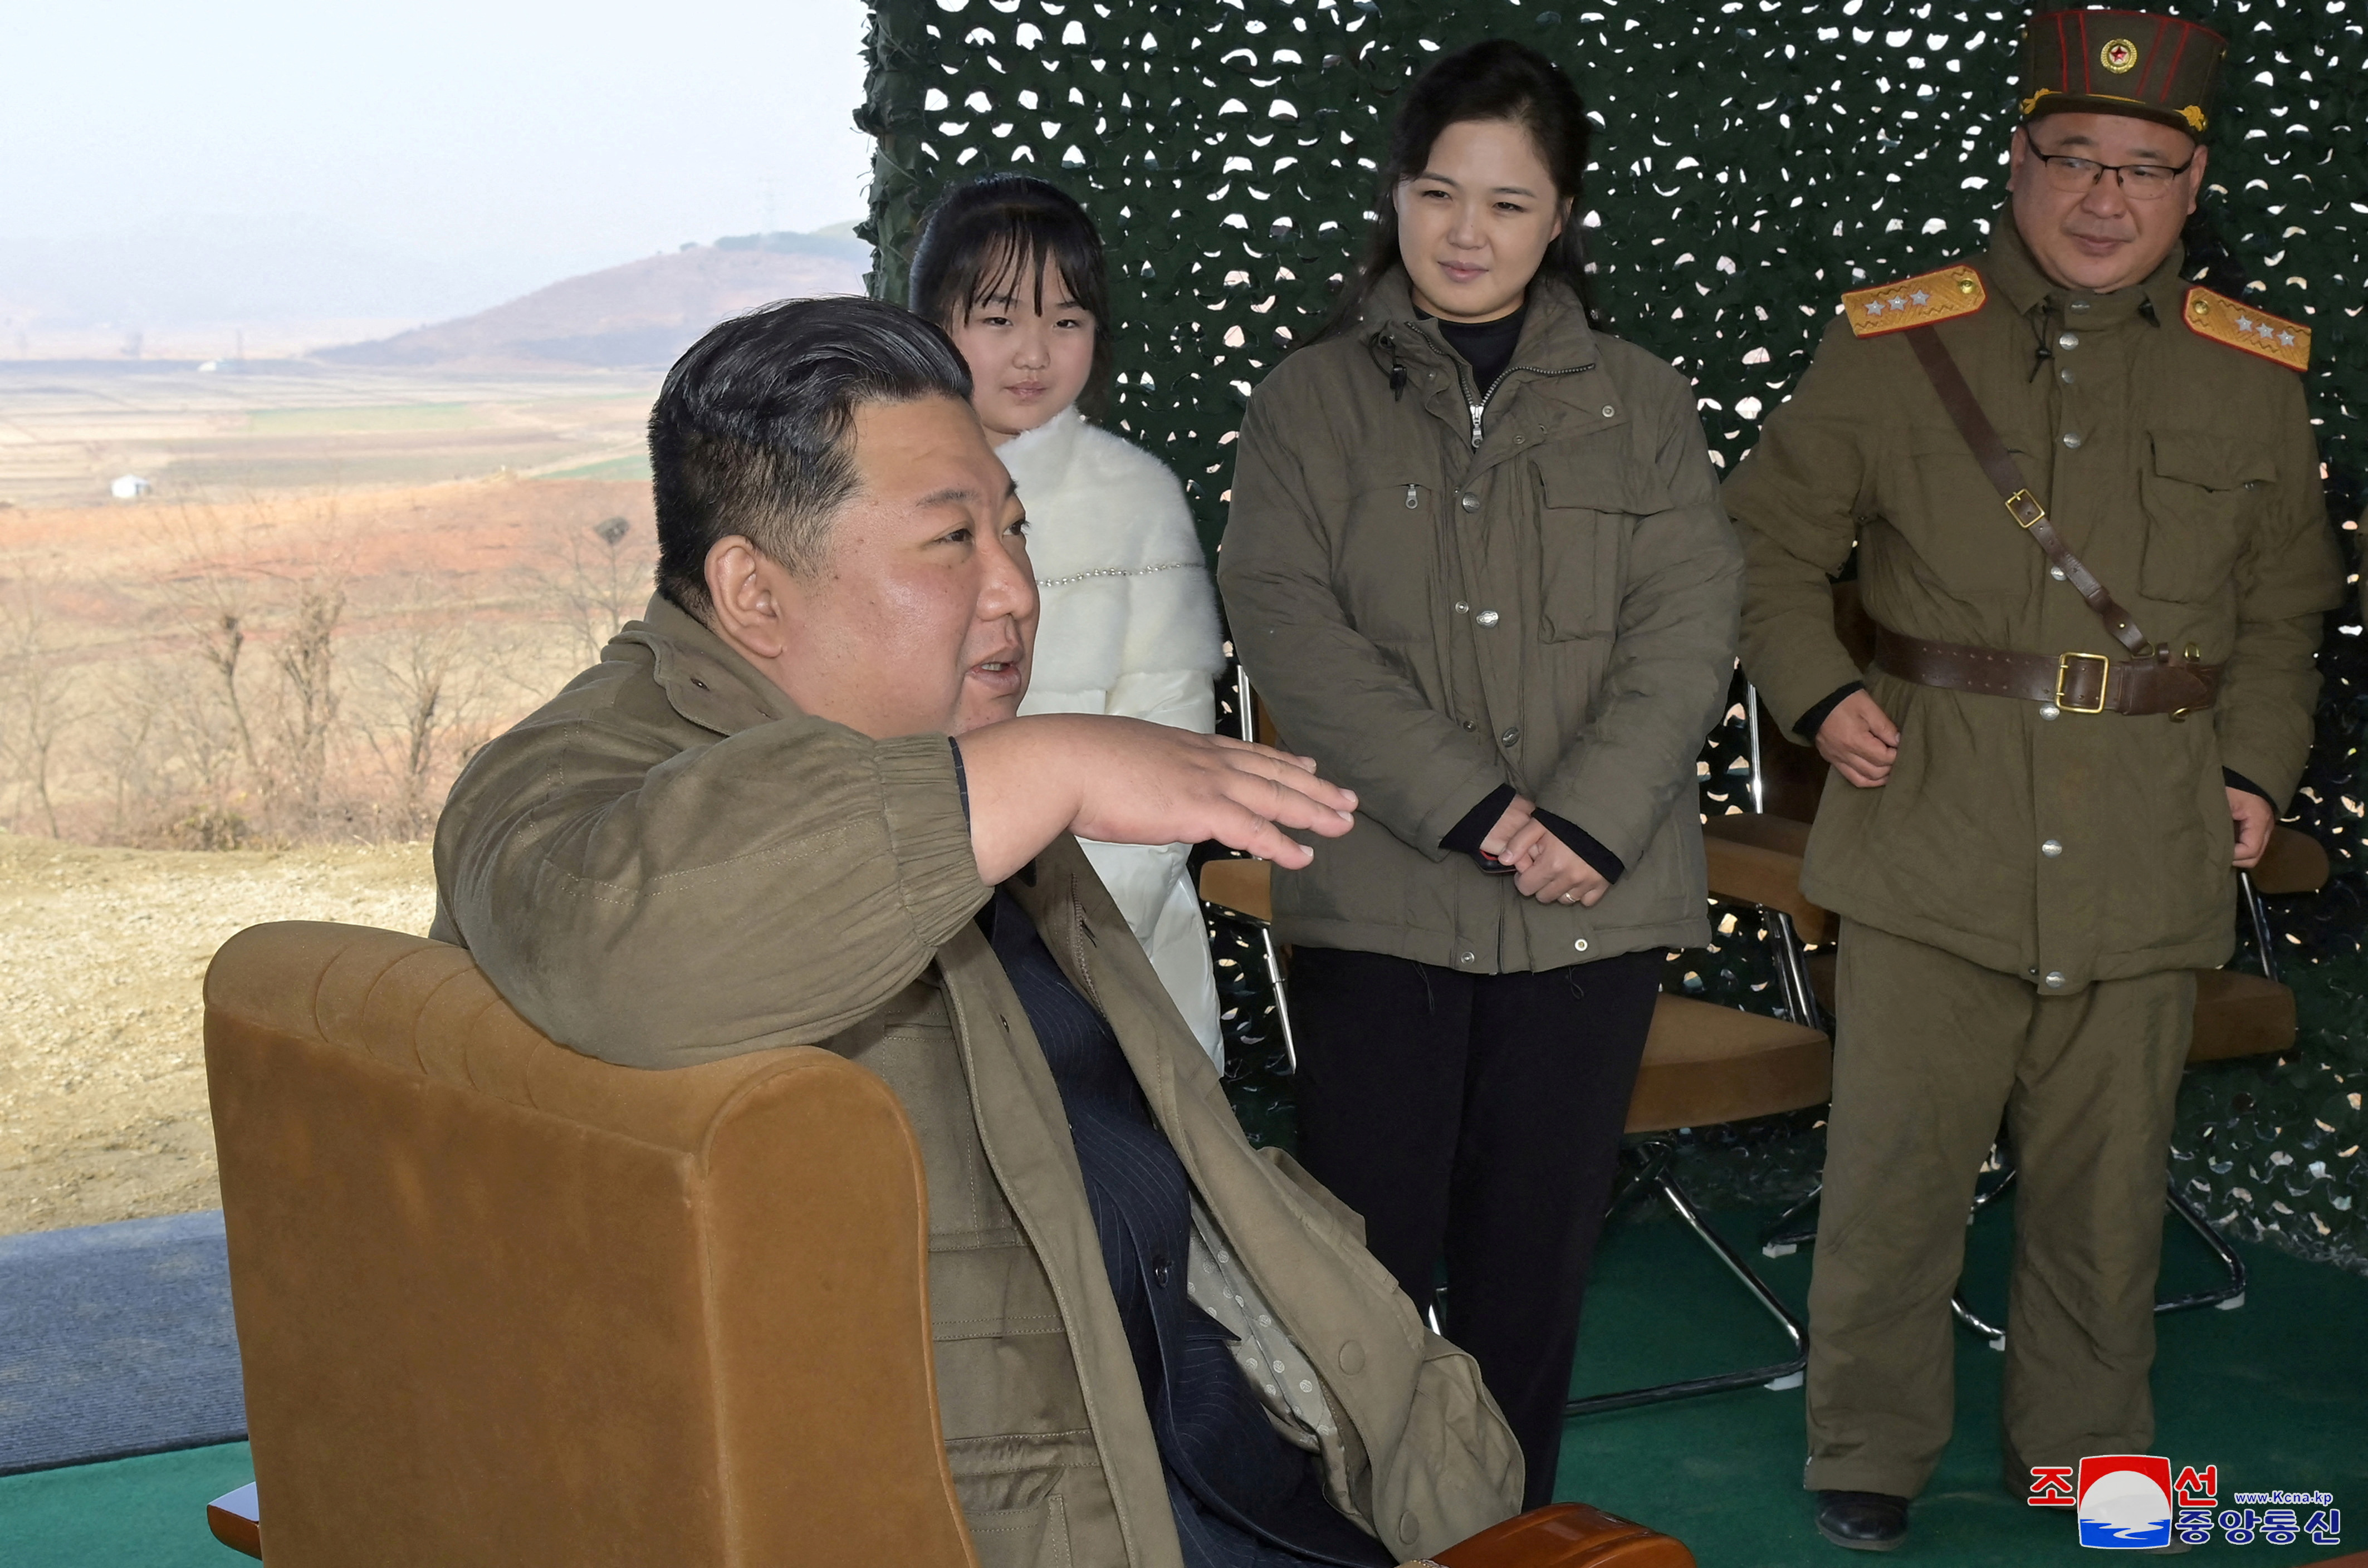 North Korean leader Kim Jong Un, with his wife Ri Sol Ju and their daughter, speaks on the day of the launch of an ICBM in this undated photo released by KCNA